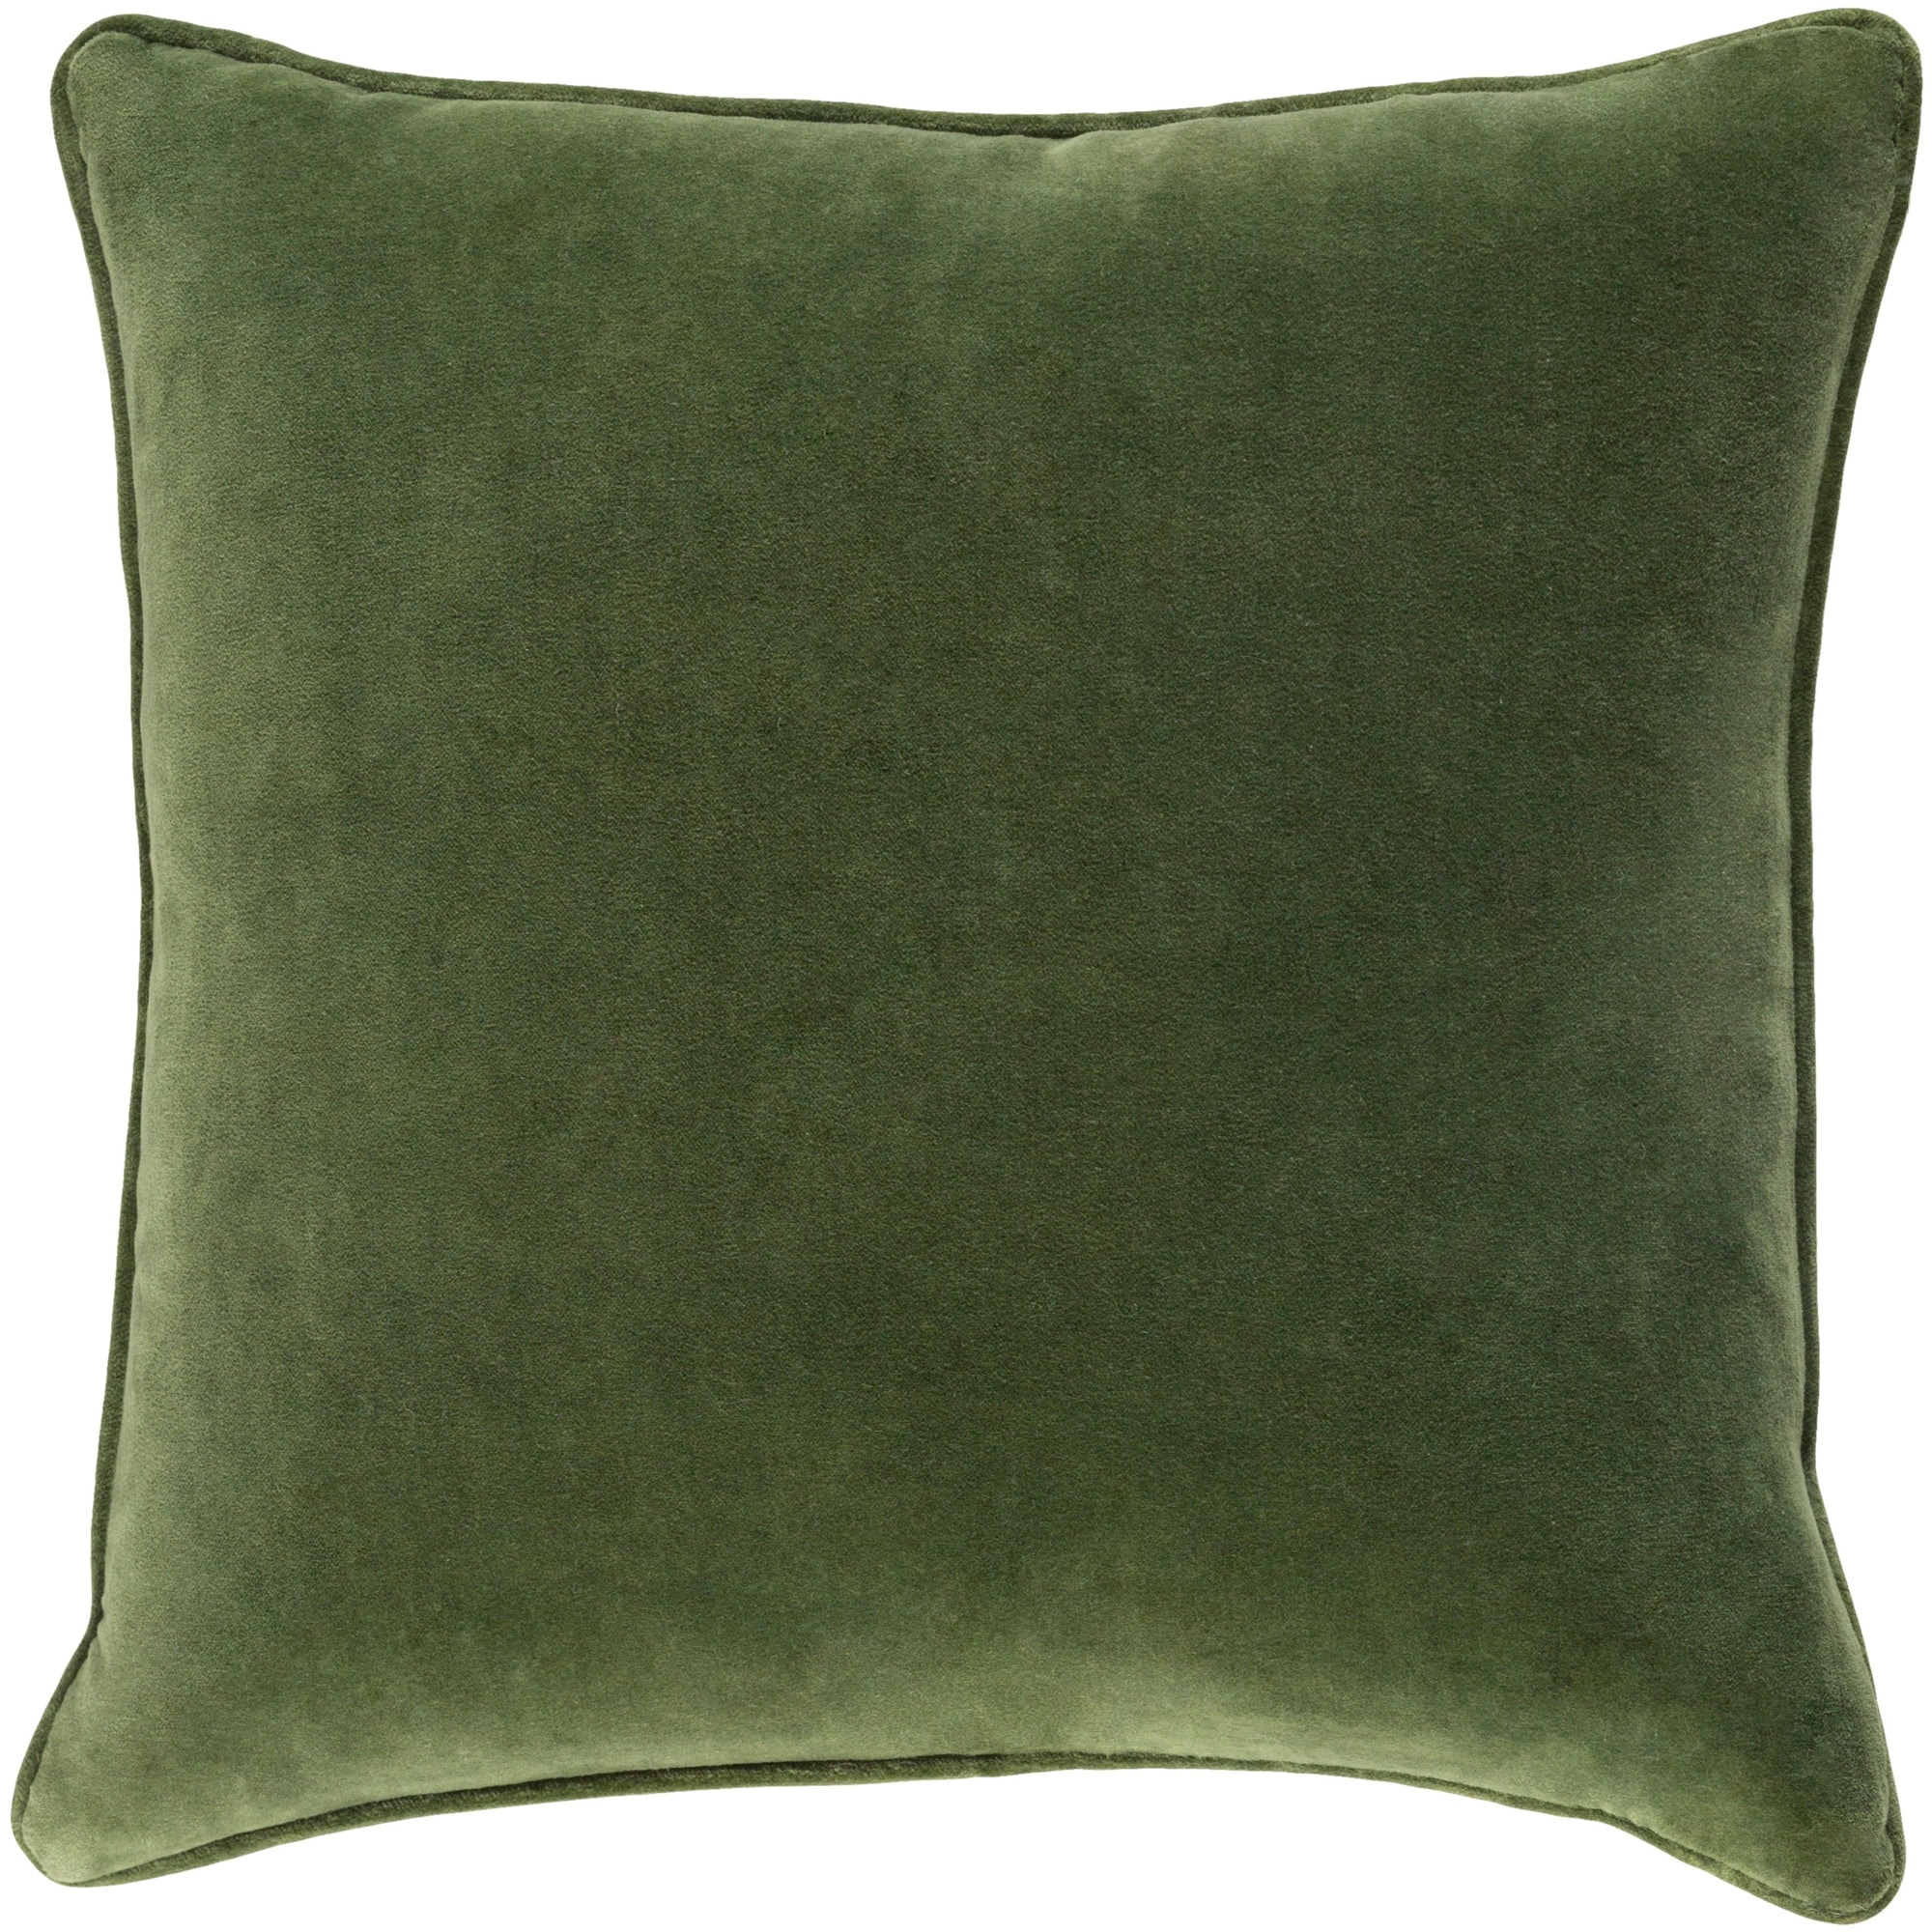 Decorative Vesey Green 18-inch Throw Pillow Cover